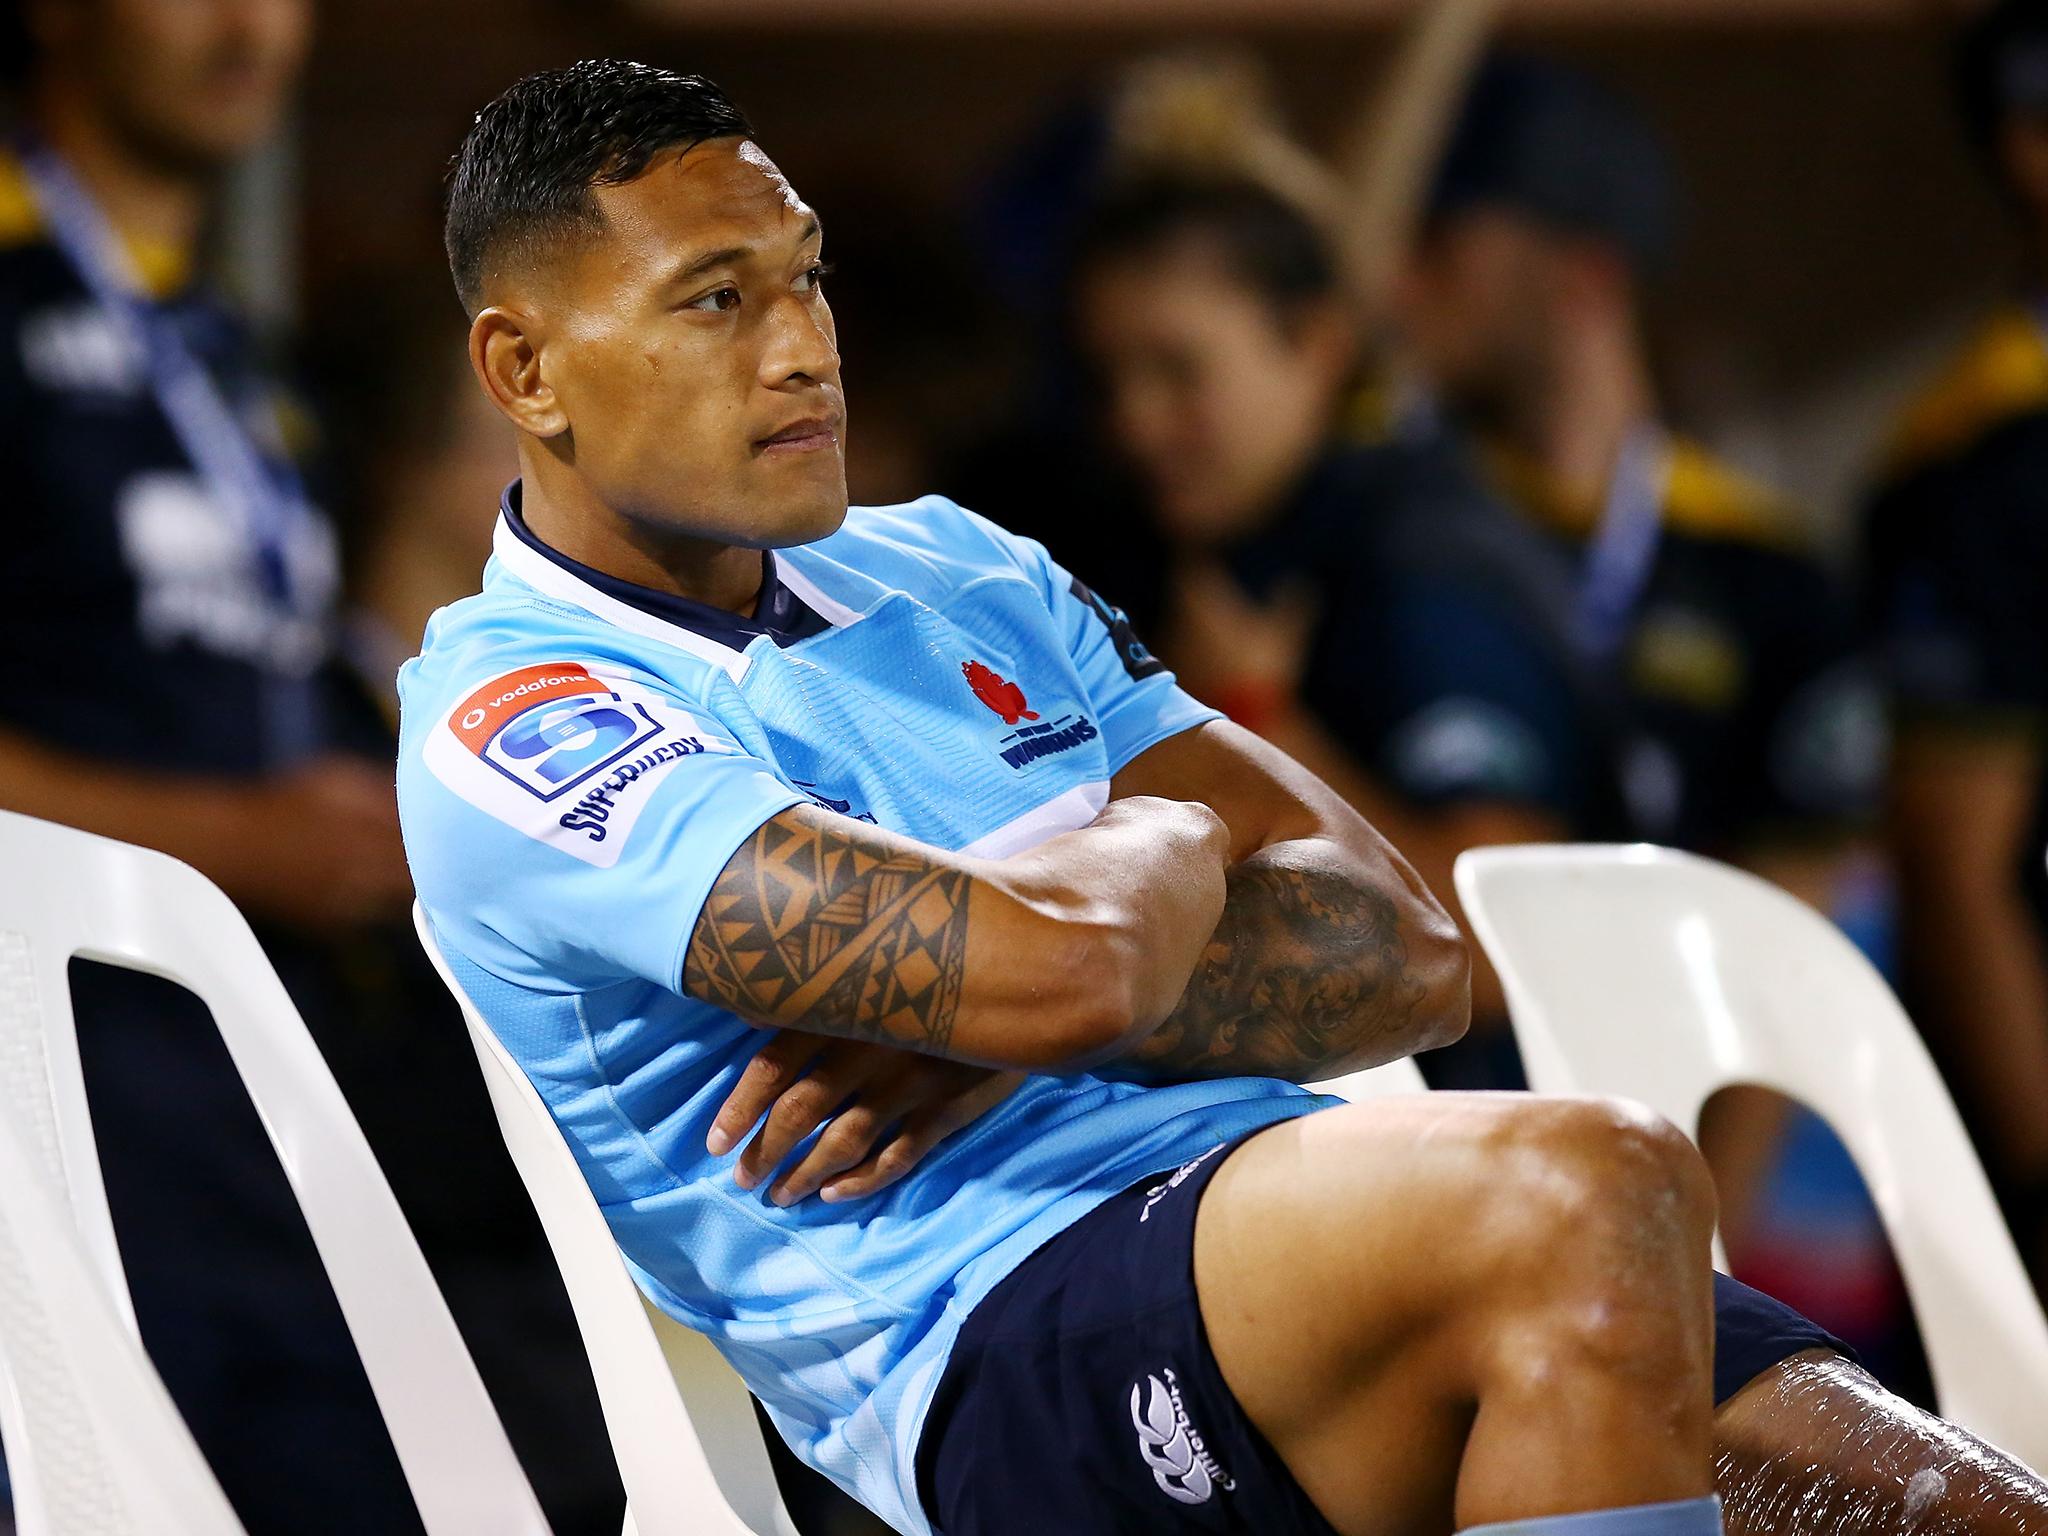 Folau's archaic views are not welcome in rugby